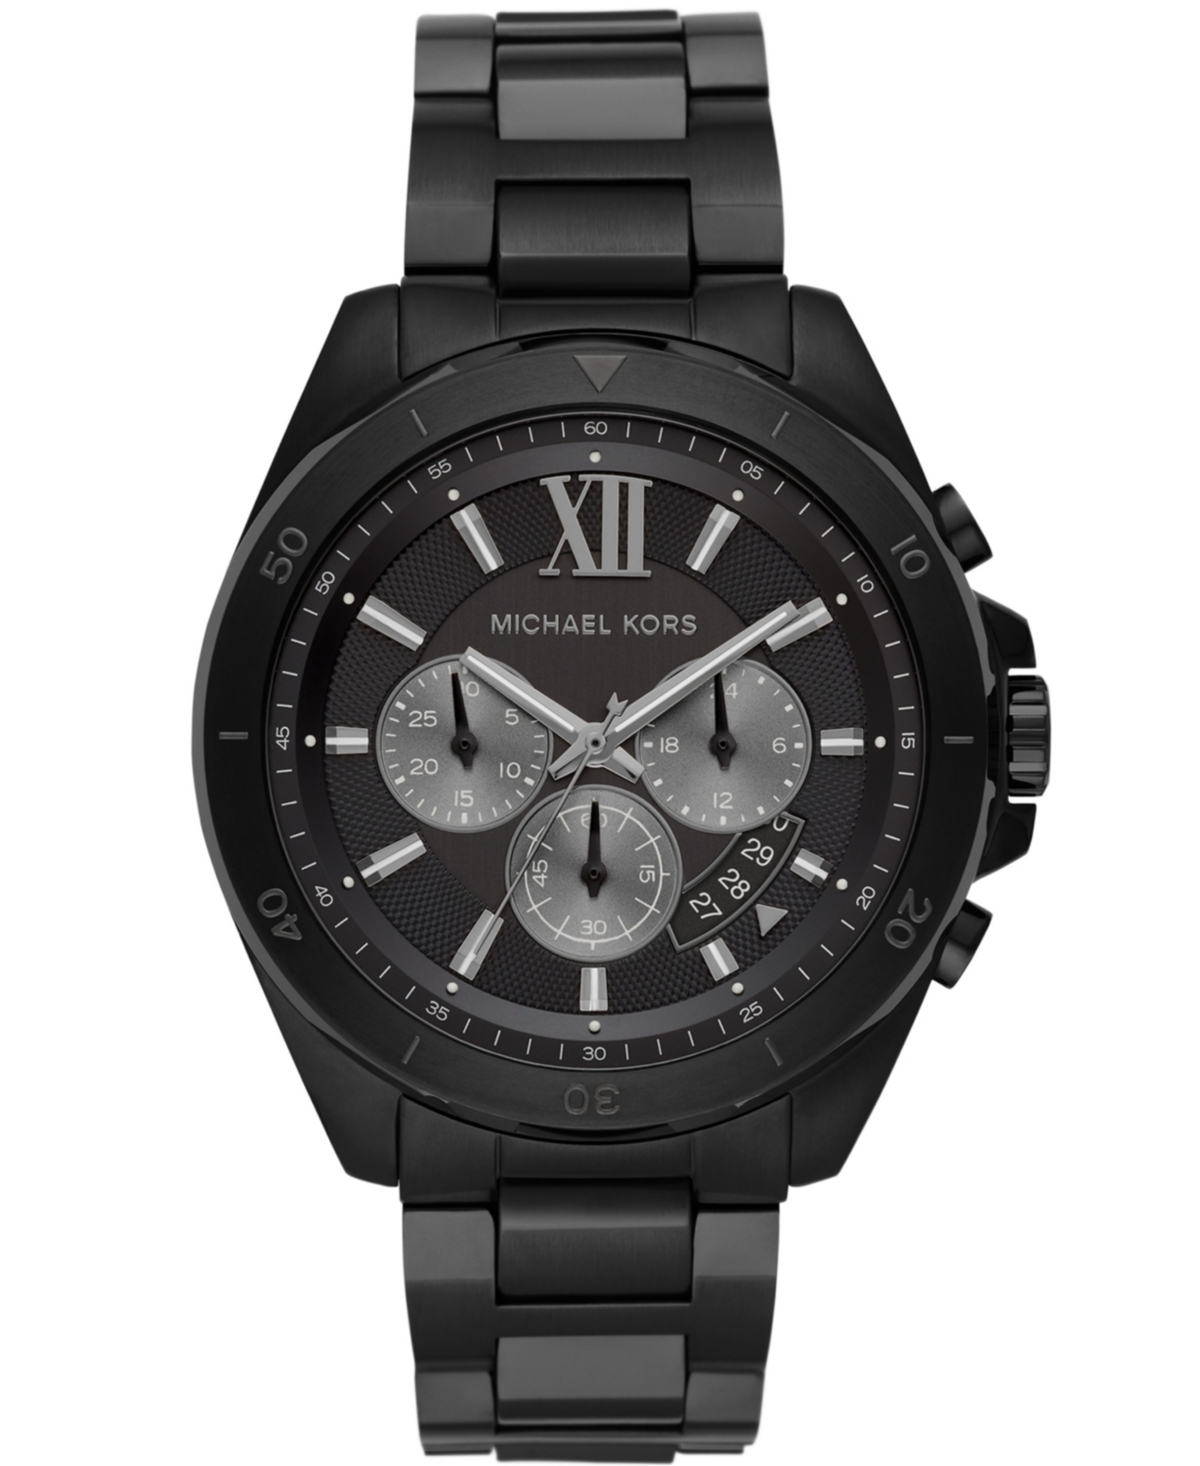 Michael Kors Men's Brecken Chronograph Black Stainless Steel Bracelet Watch  45mm & Reviews - All Watches - Jewelry & Watches - Macy's